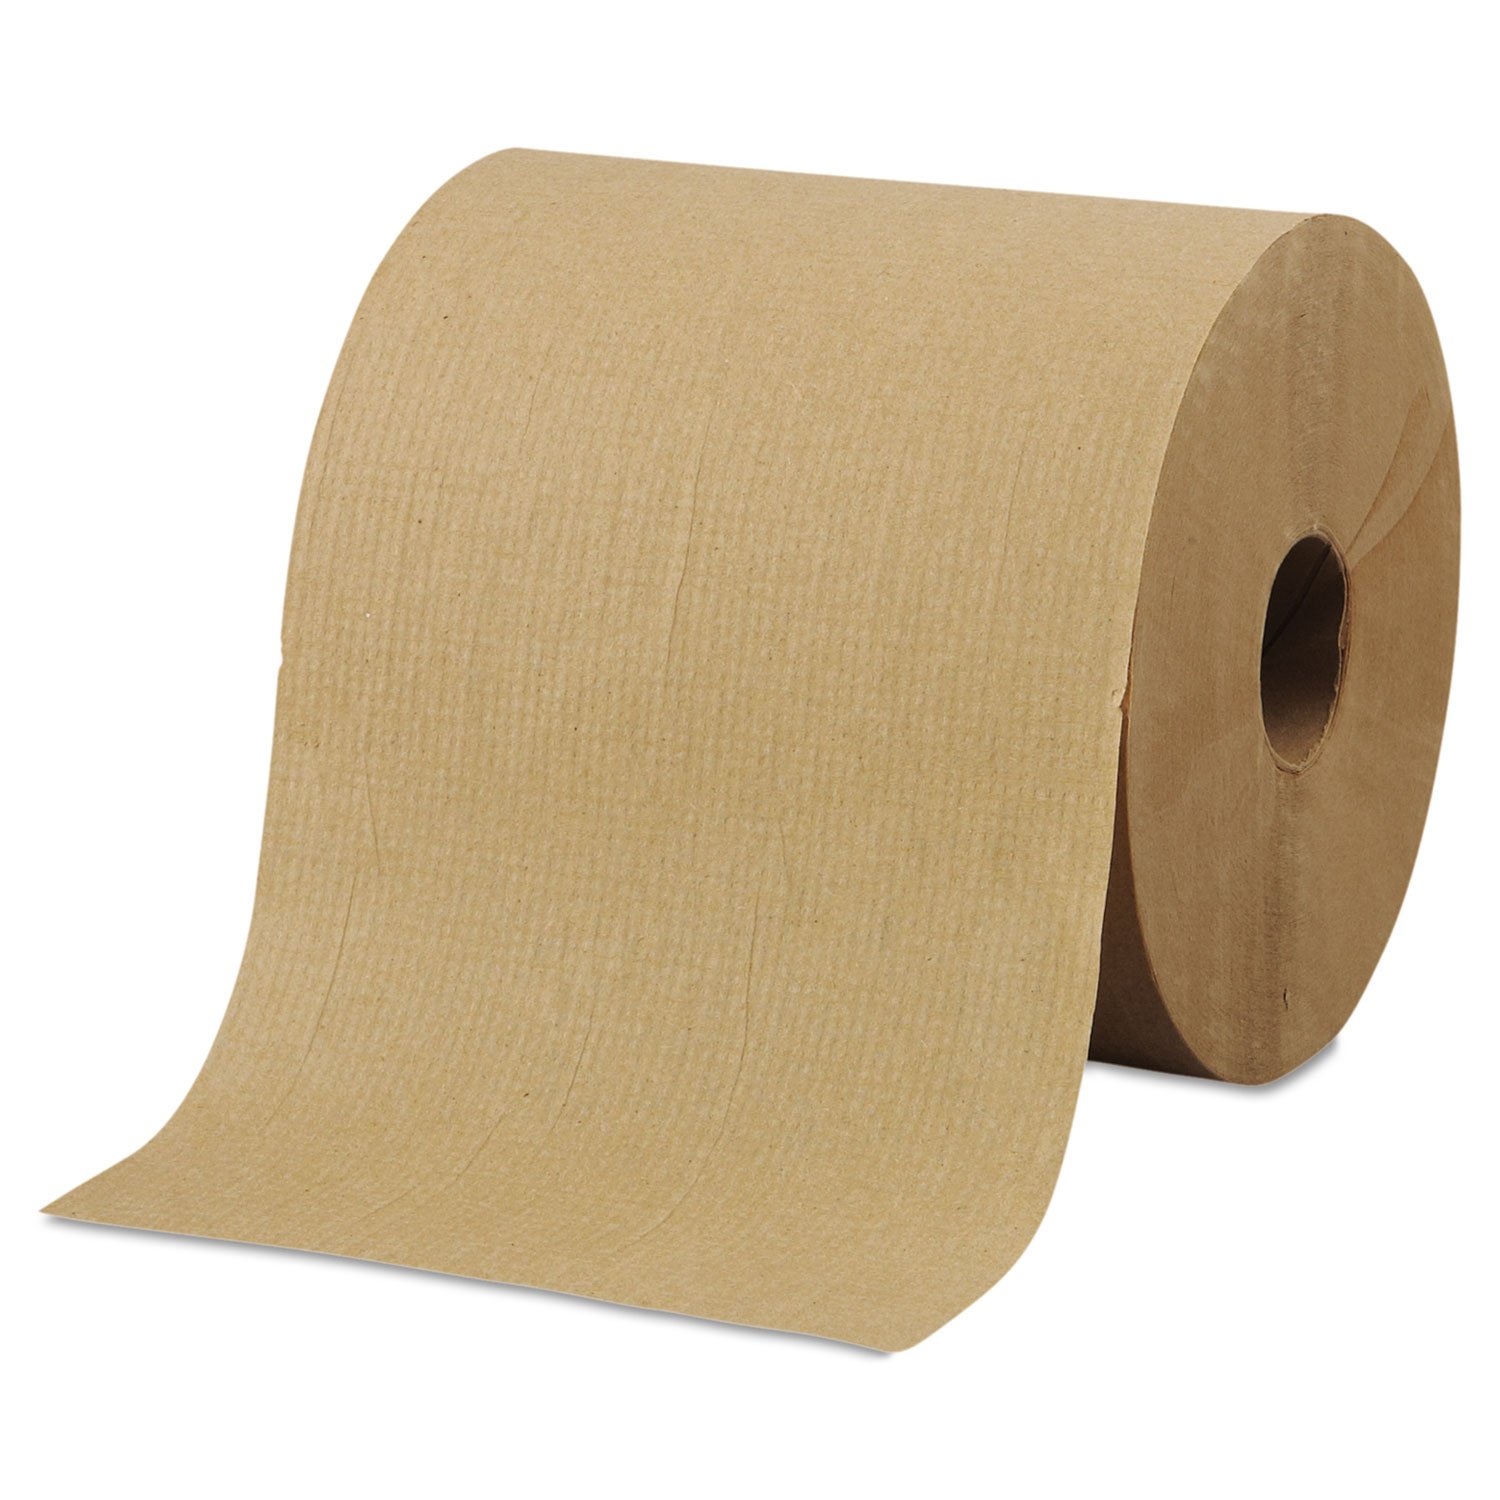 Morcon Paper R6800 Hardwound Roll Towels 8-Inch x 800ft Brown 6 Rolls/Carton